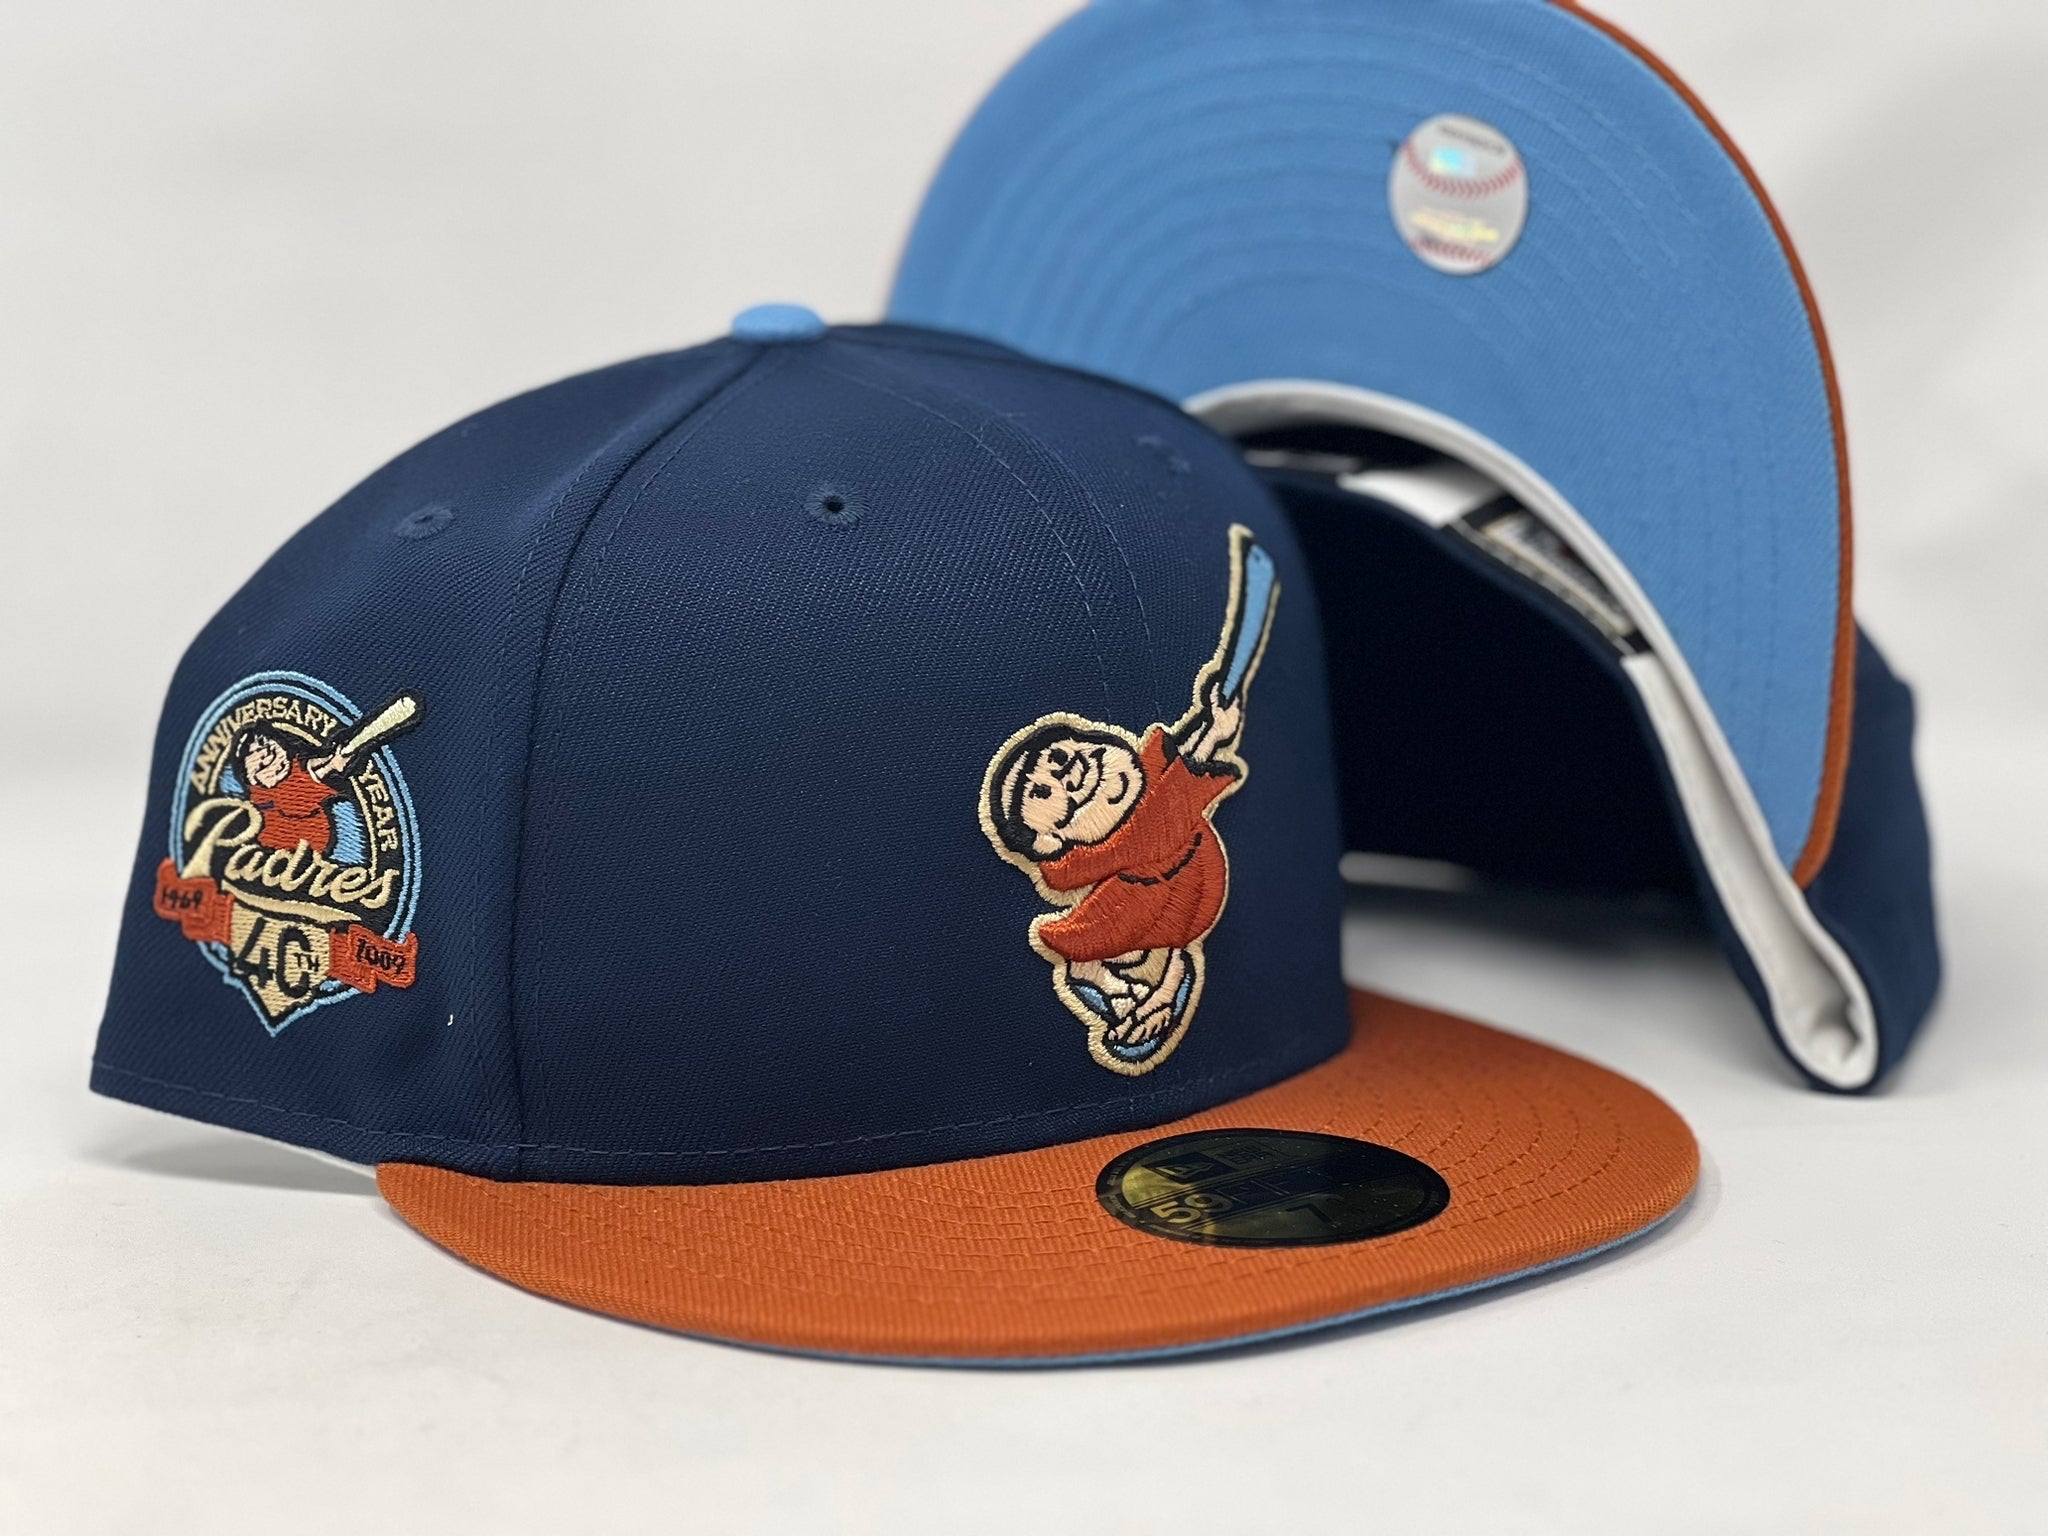 Vegas Gold San Diego Padres Brown Visor Icy Blue Bottom 40th Anniversary Side Patch New Era 59FIFTY Fitted 7 3/4